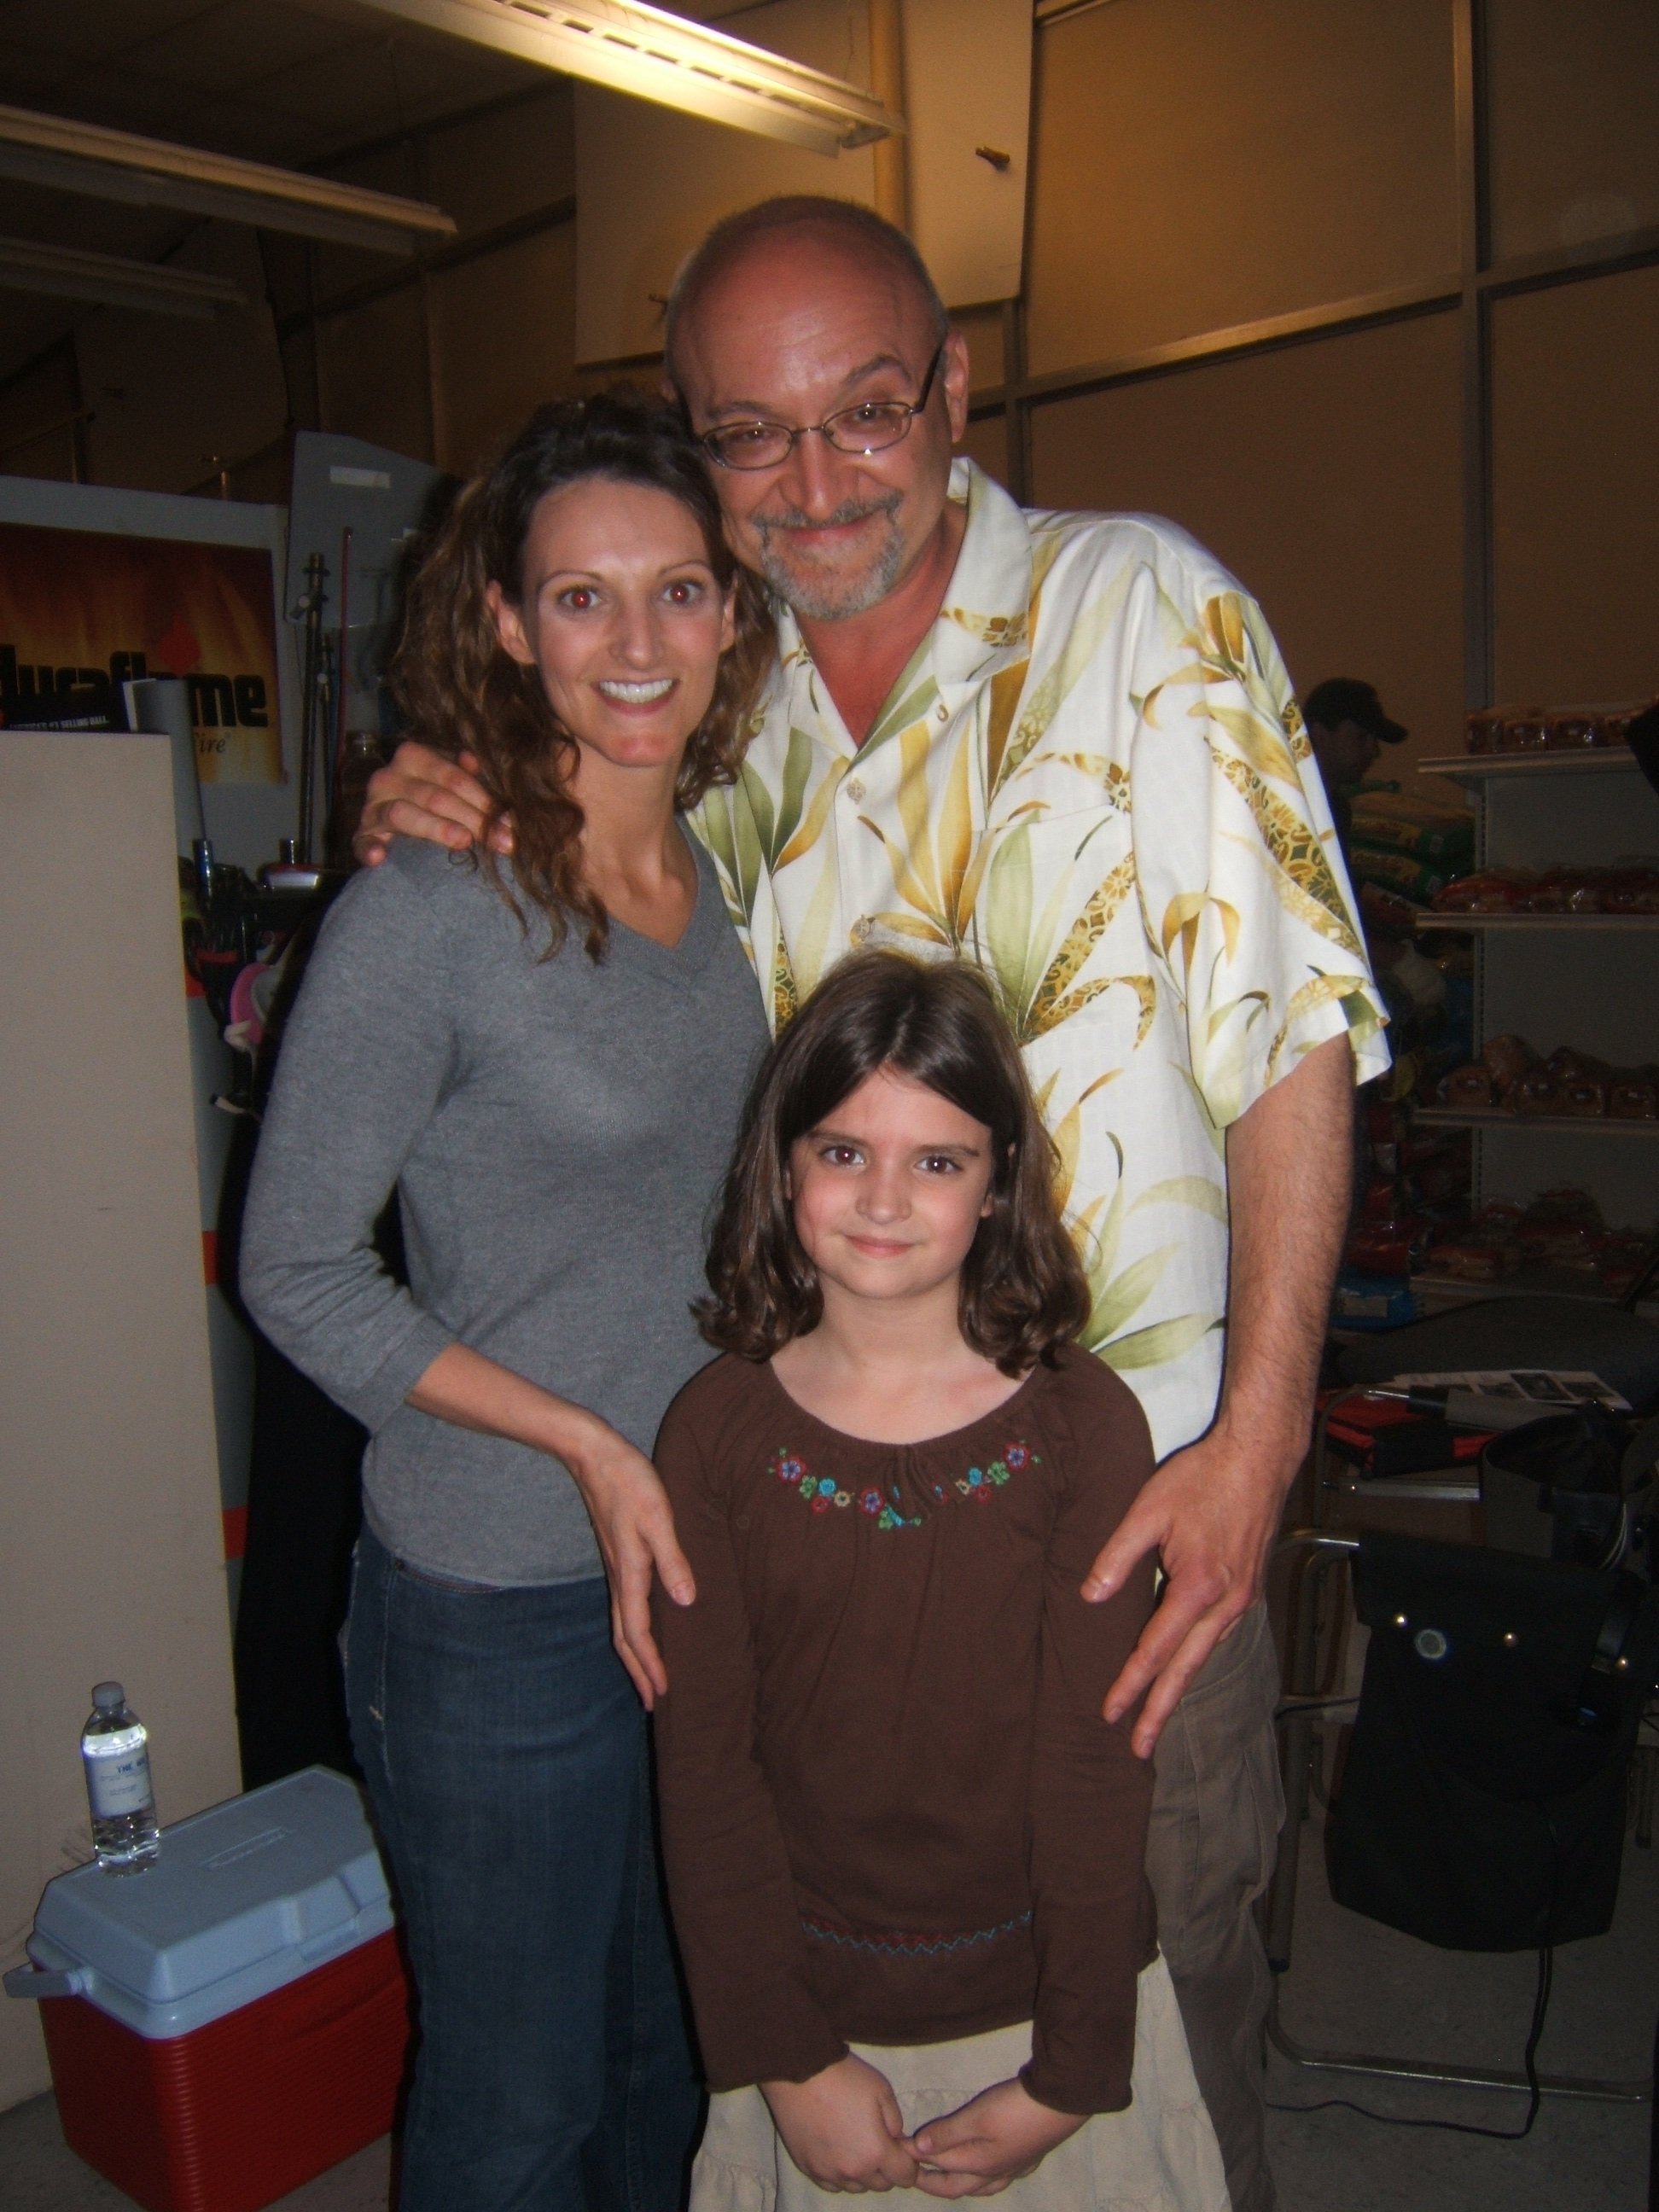 Dodie Brown & daughter, Taylor Brown, with Director Frank Darabont on set of Stephen King's The Mist